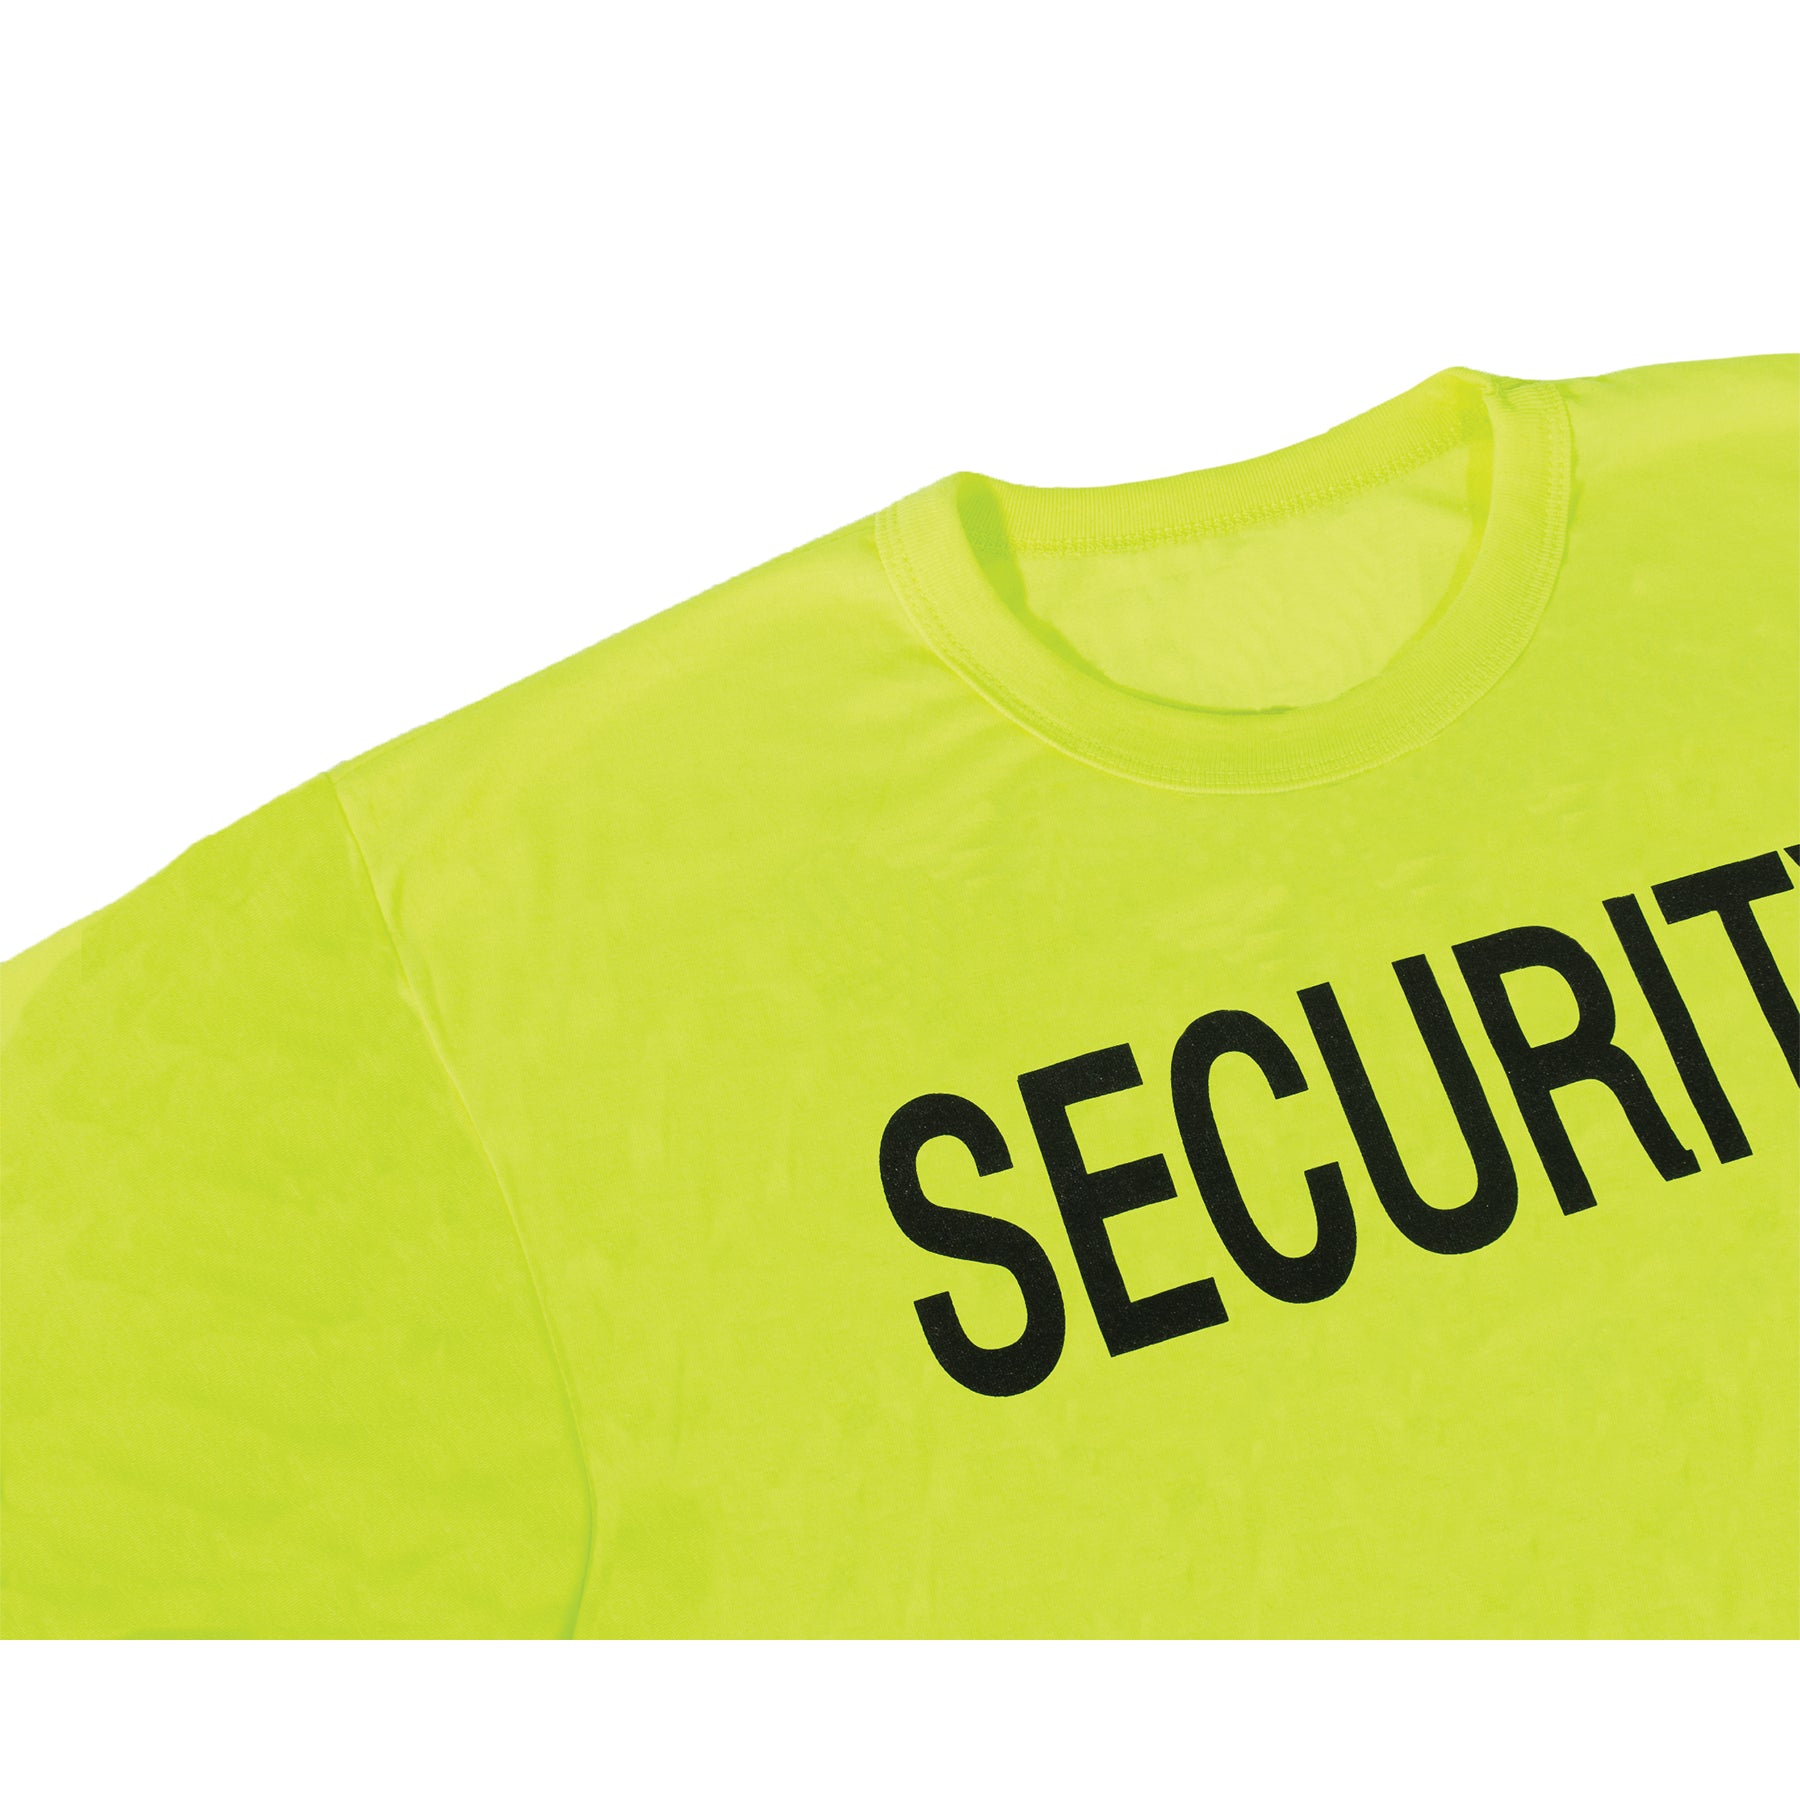 Rothco 2-Sided Security T-Shirt - Safety Green - Tactical Choice Plus